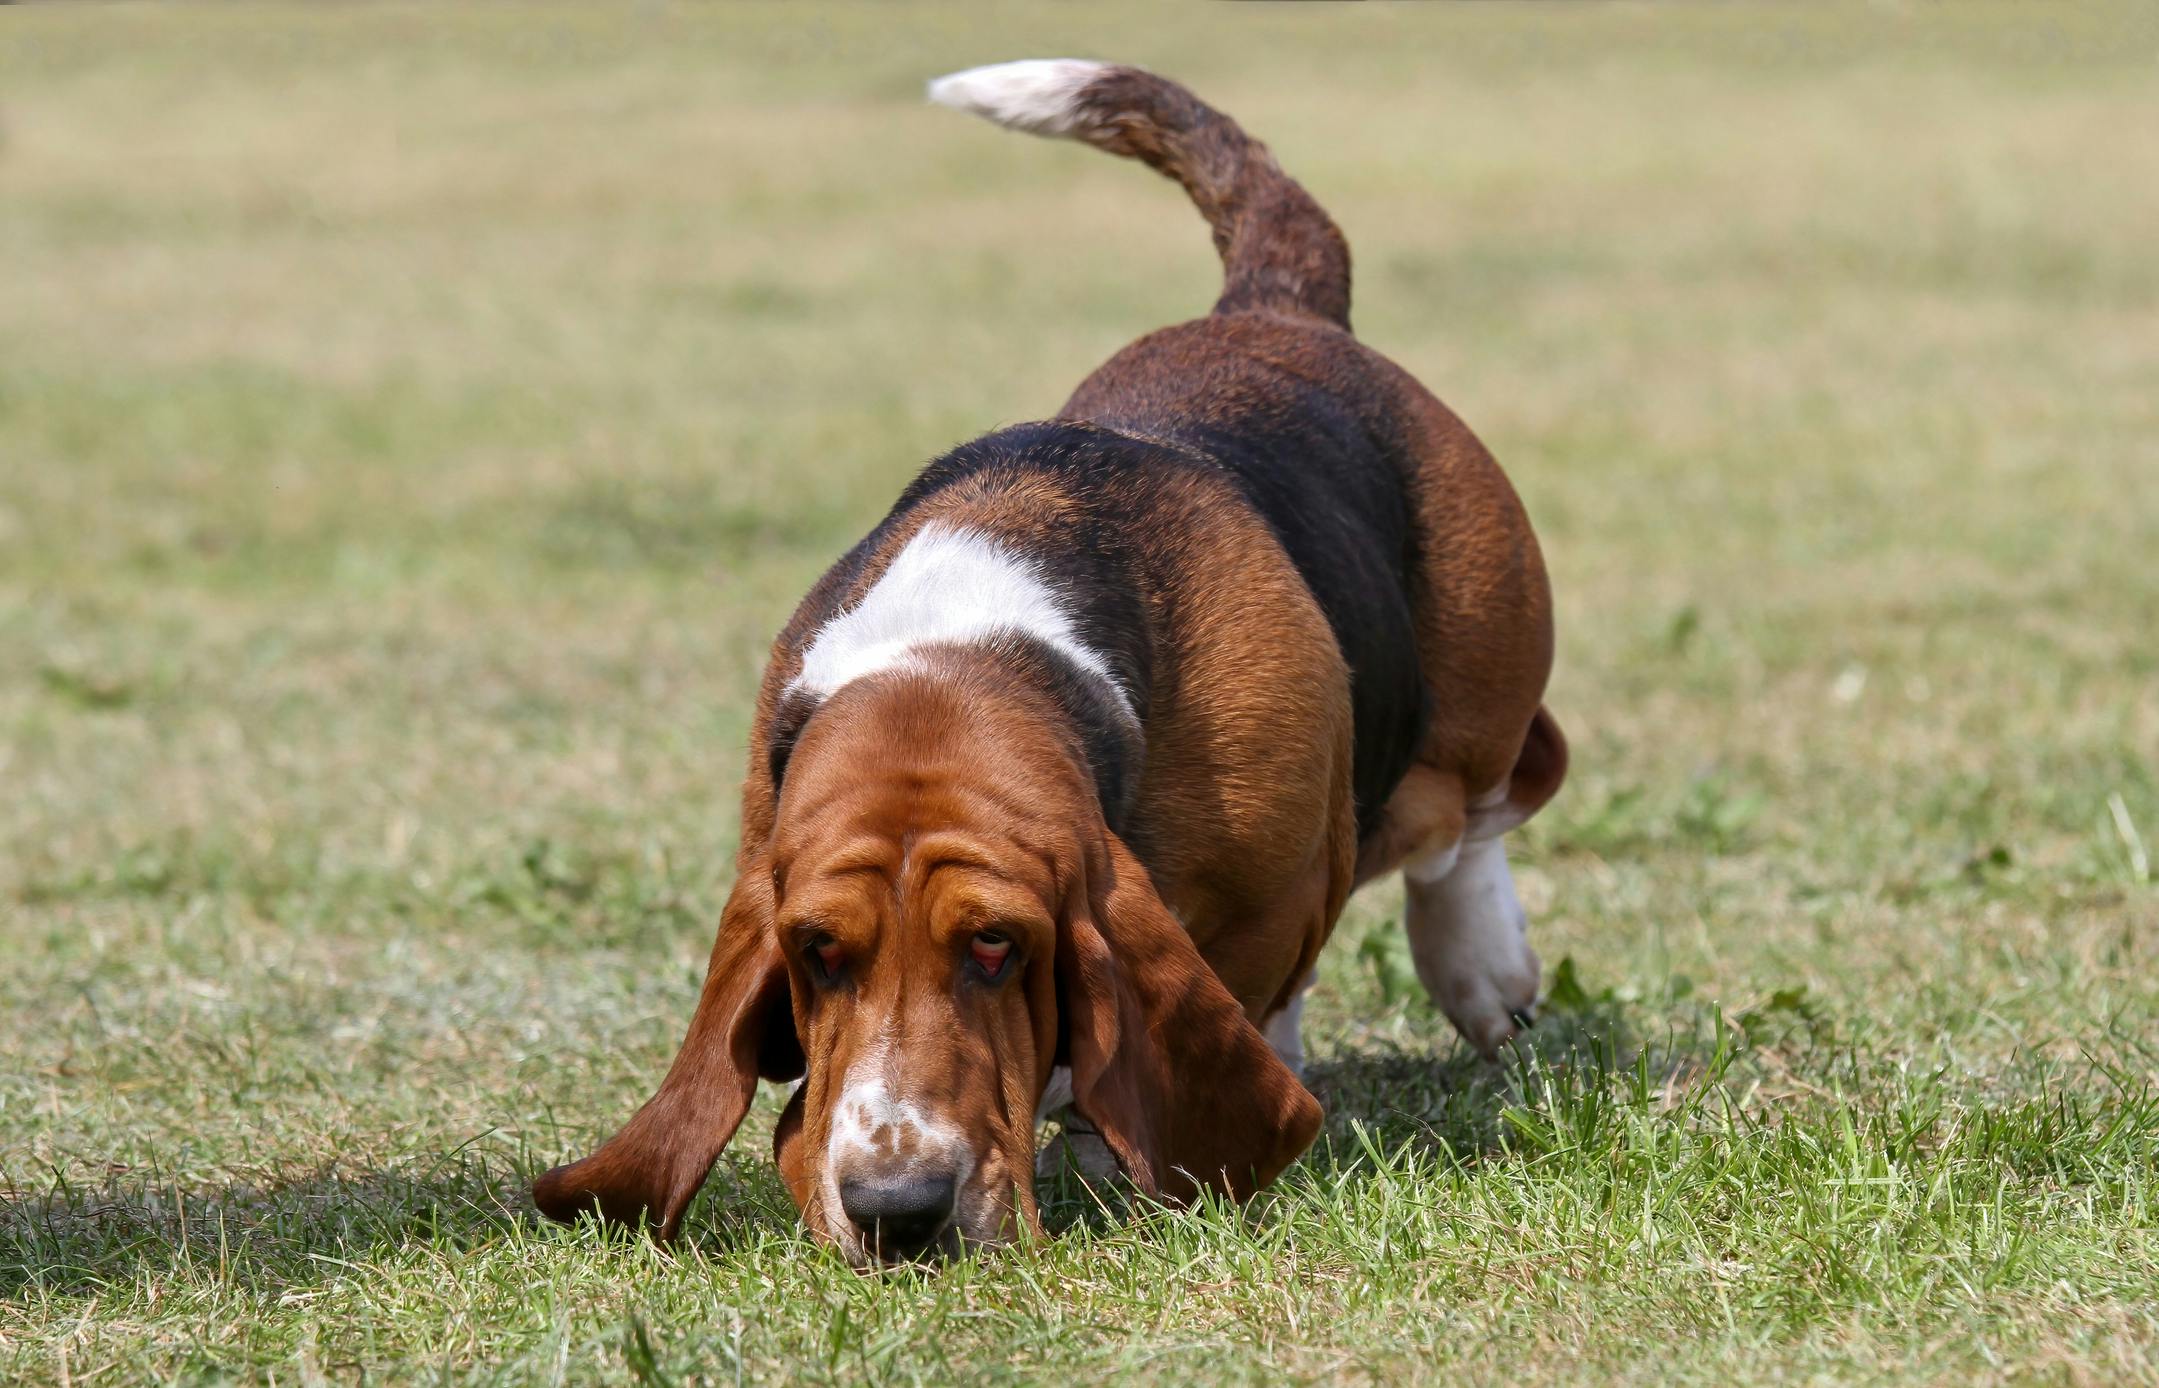 Basset Hound following a trail in the grass.